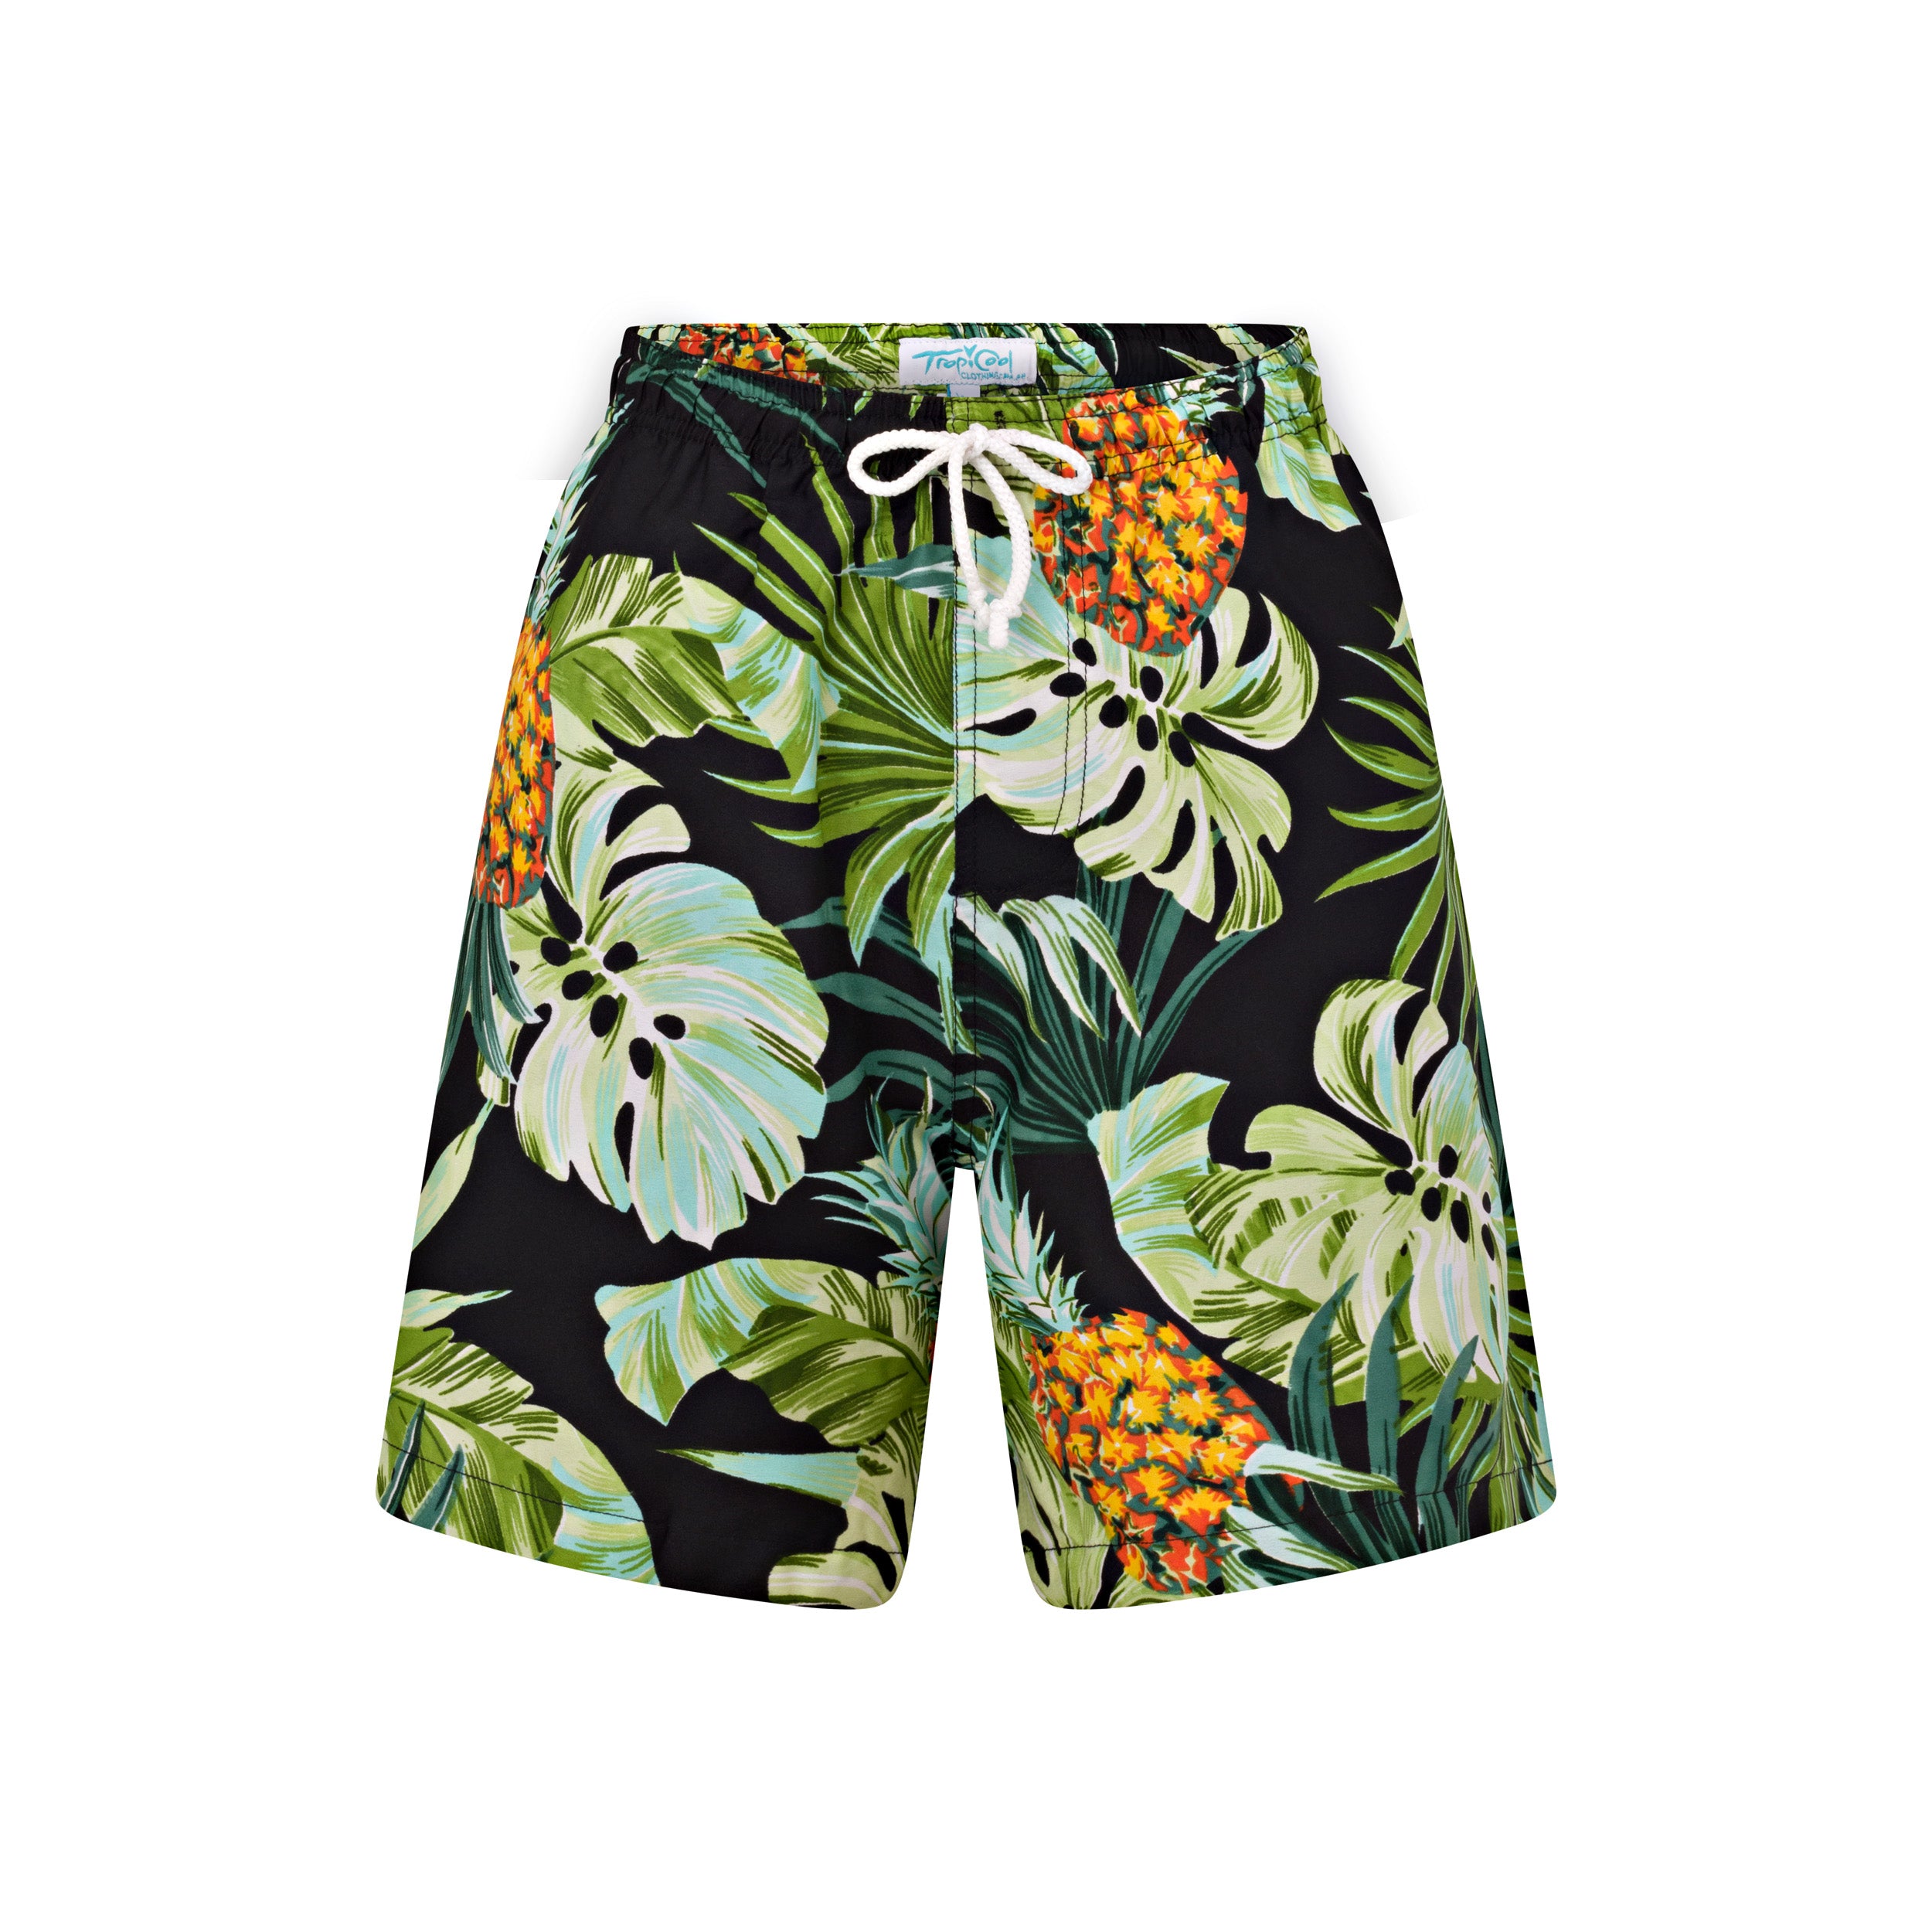 Pineapple Jungle Black and Green Adult Shorts